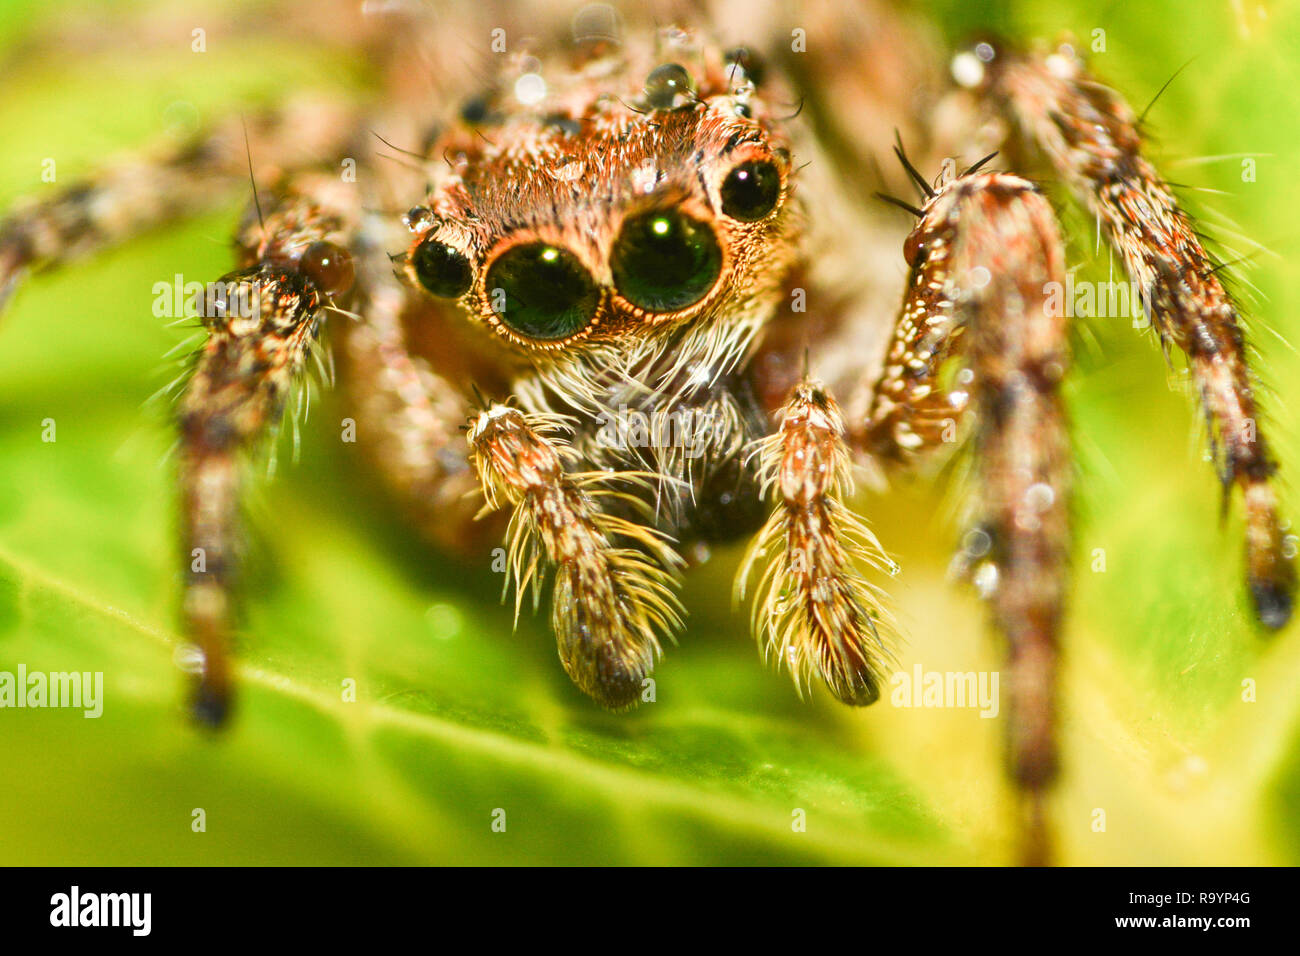 Jumping spider beautiful / Close up of jumping spider colorful on nature green leaf plant background / Little jumping spider on leaf extreme macro - M Stock Photo Alamy